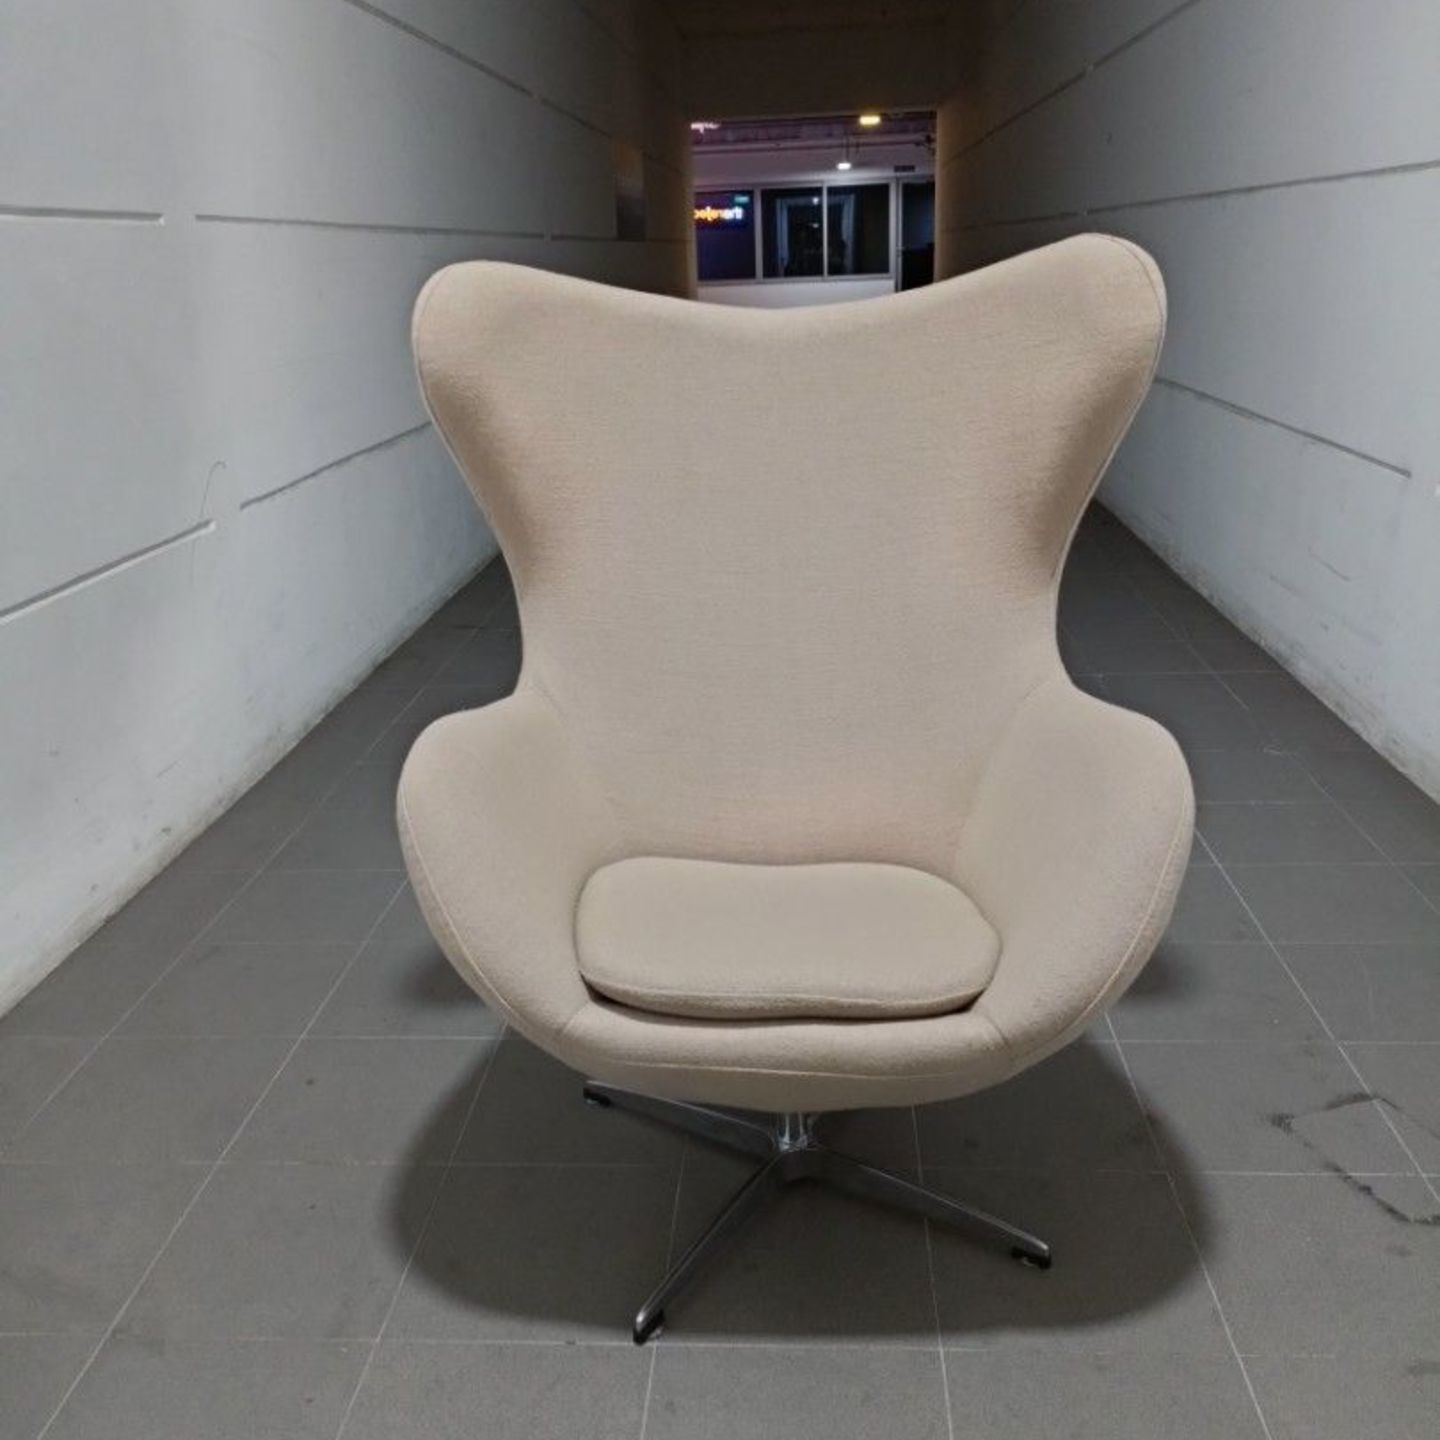 PROMETHEUS Rep Egg Chair in LIGHT BEIGE Cashmere